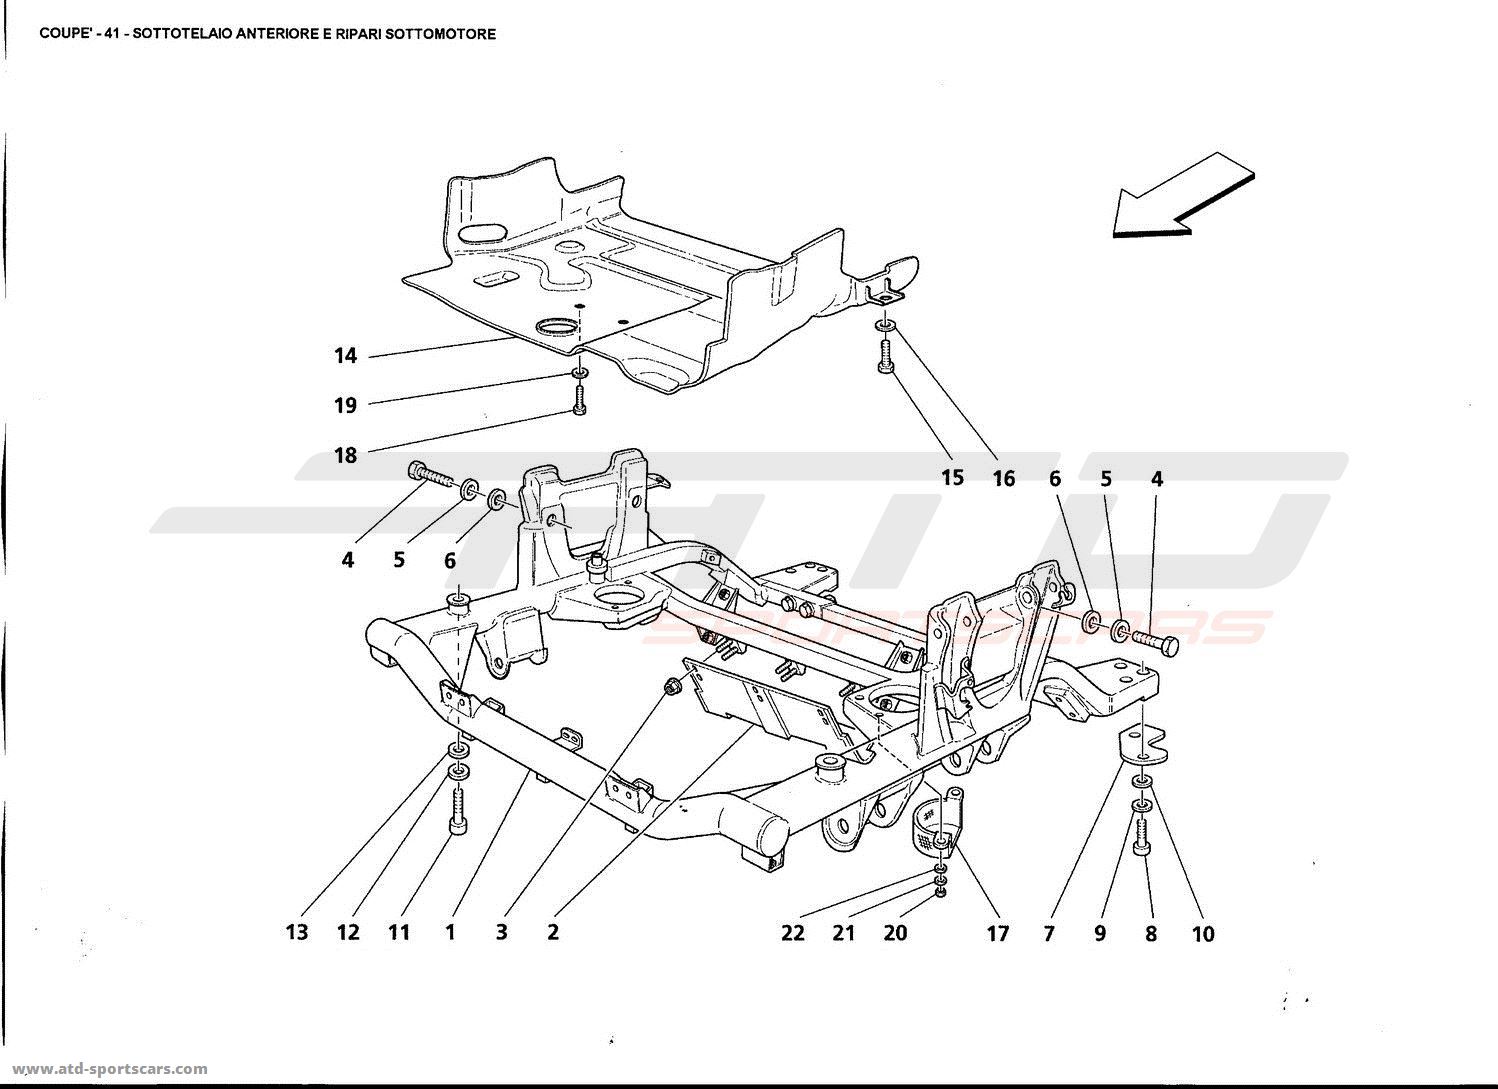 FRONT UNDER FRAME AND UNDERMOTOR SHIELDS